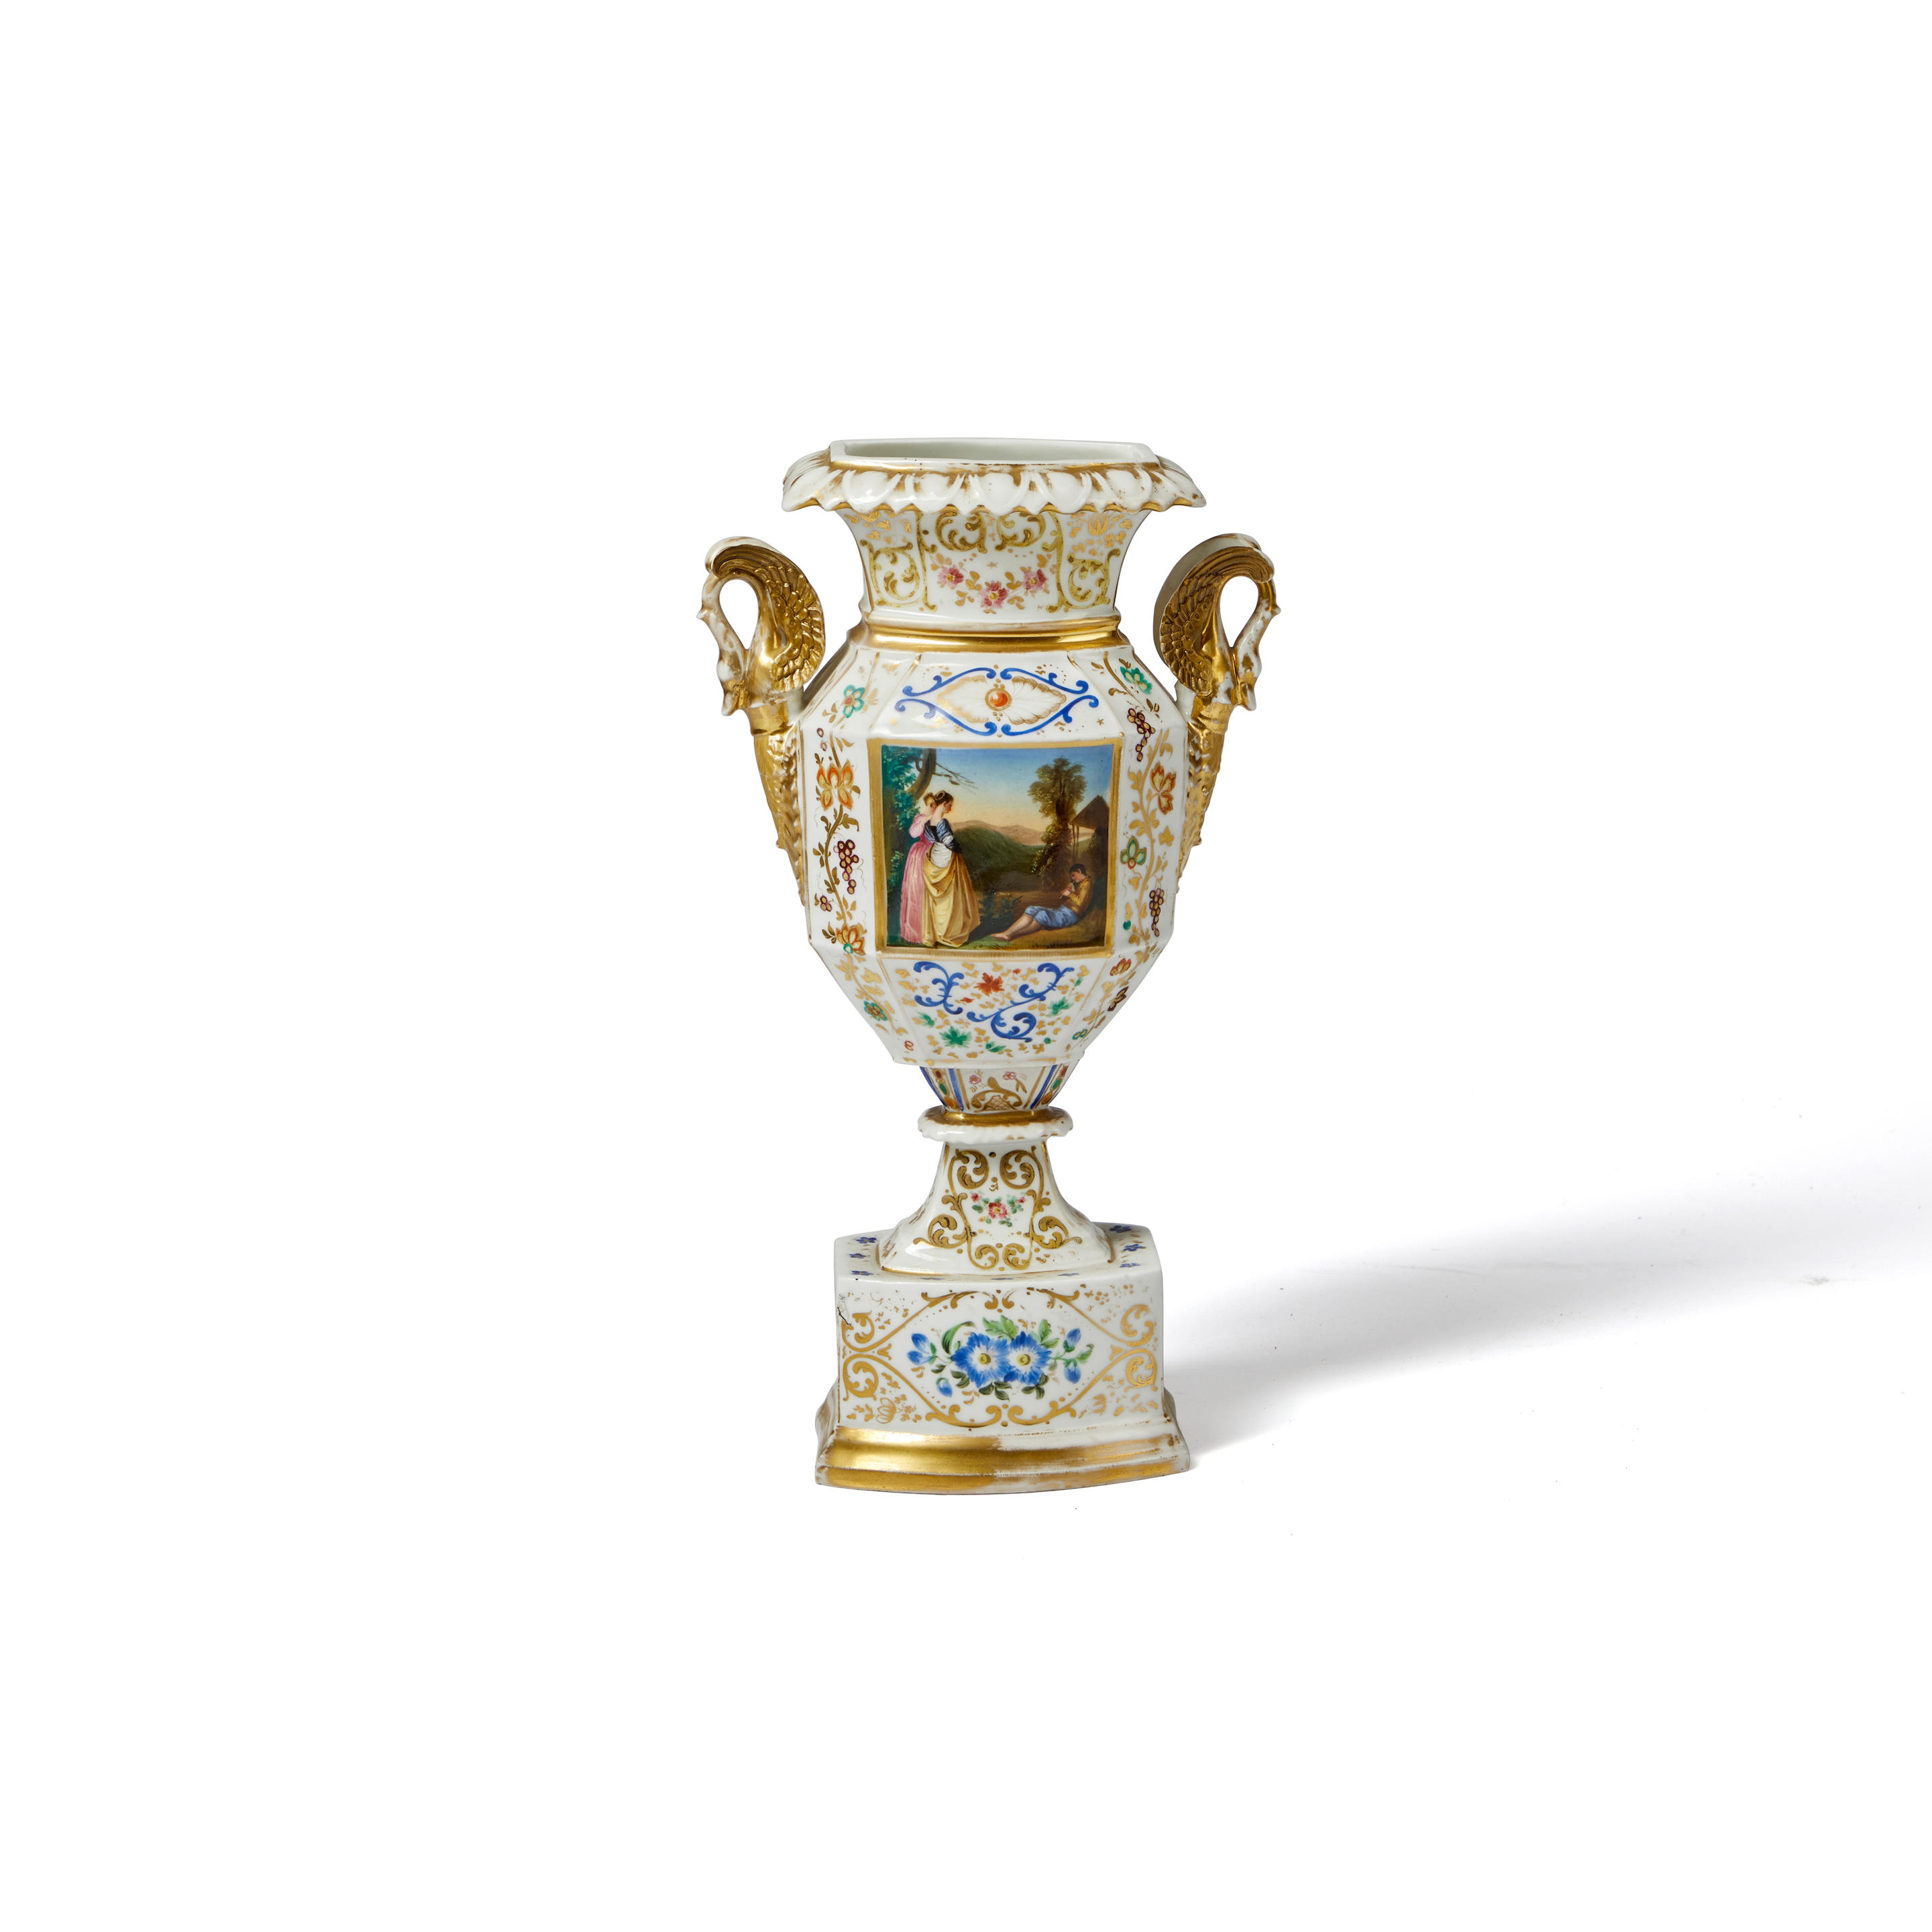 FRENCH PORCELAIN VASE with gilded swan